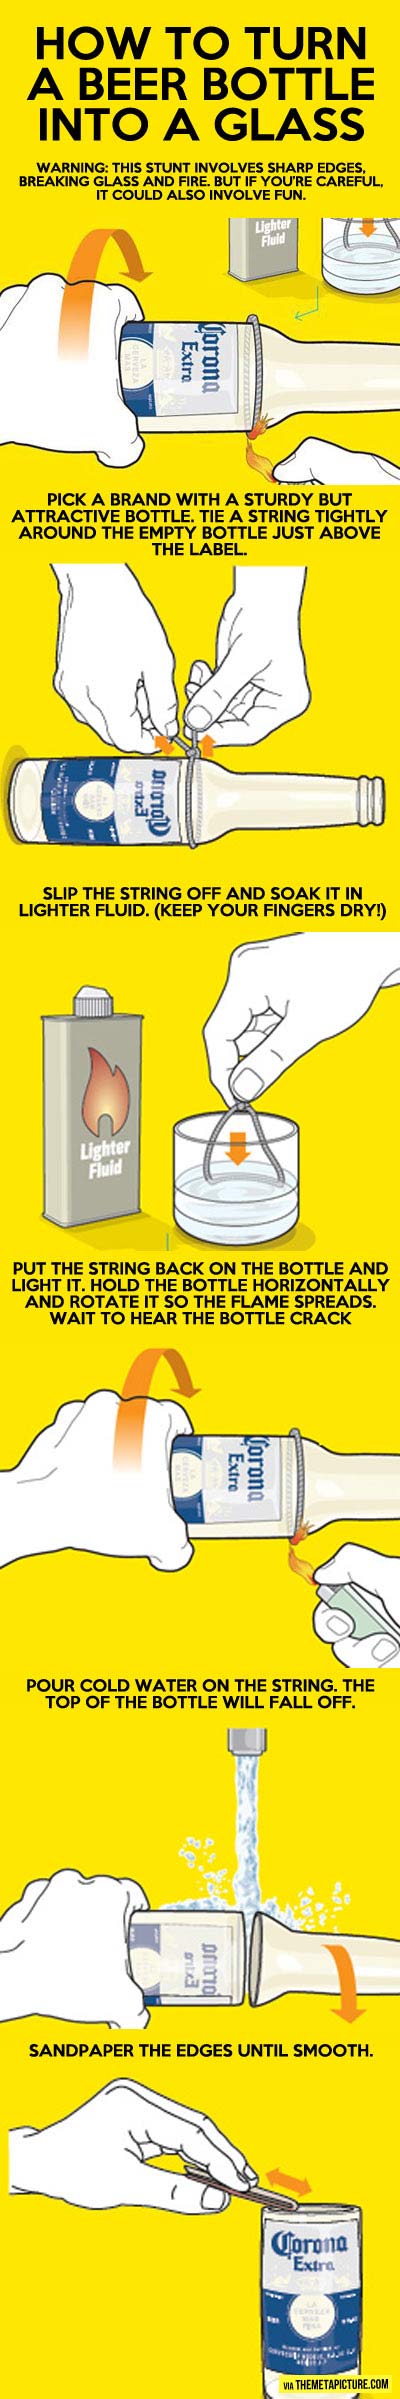 How to turn a beer bottle into a glass…